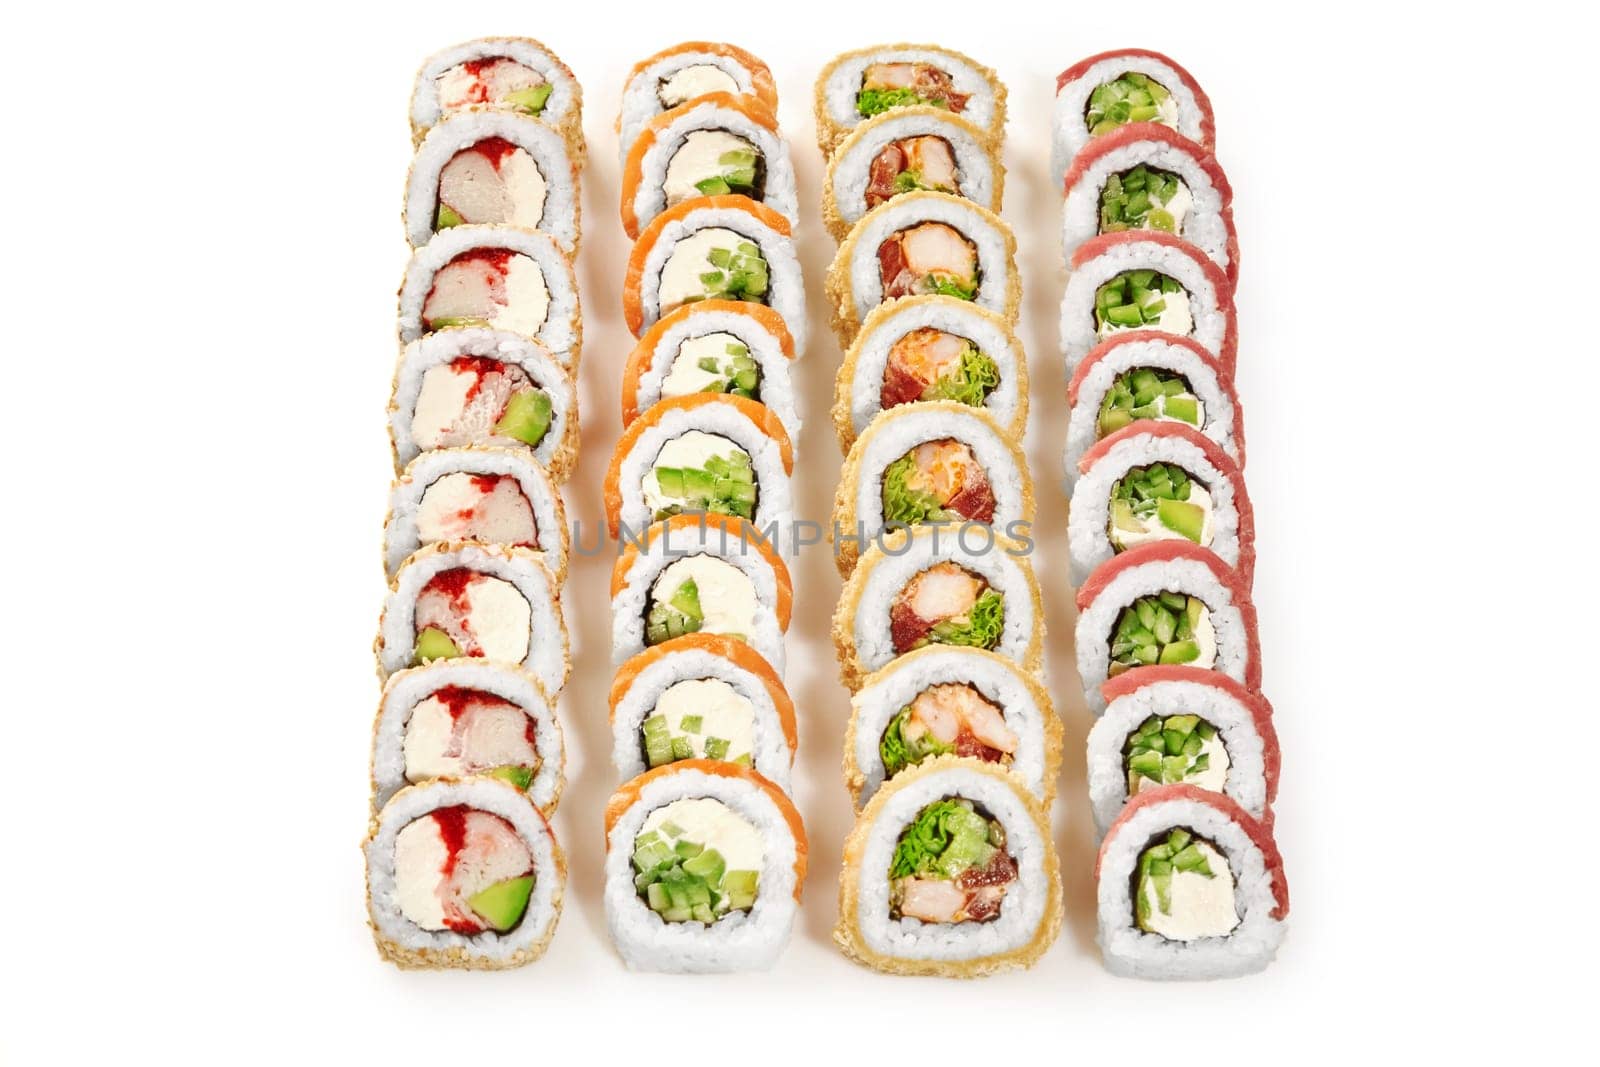 Colorful set of sushi rolls for Japanese themed party by nazarovsergey